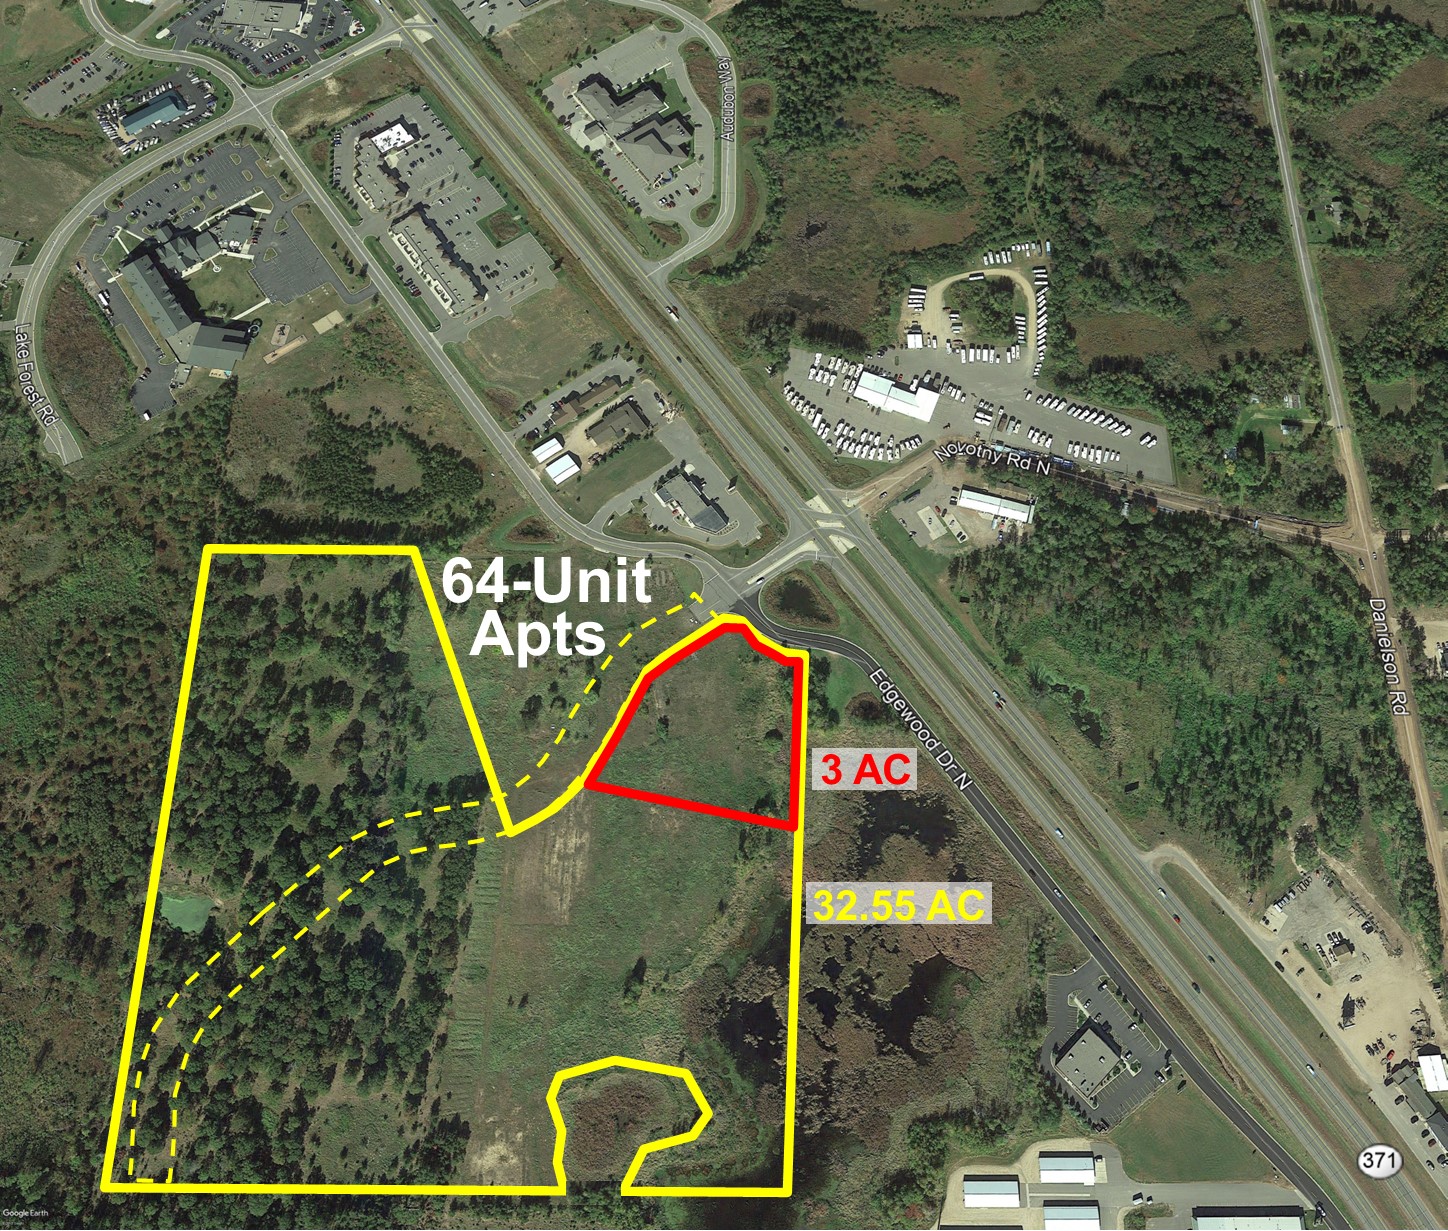 Hwy 371 Commercial Acreage (3 AC)